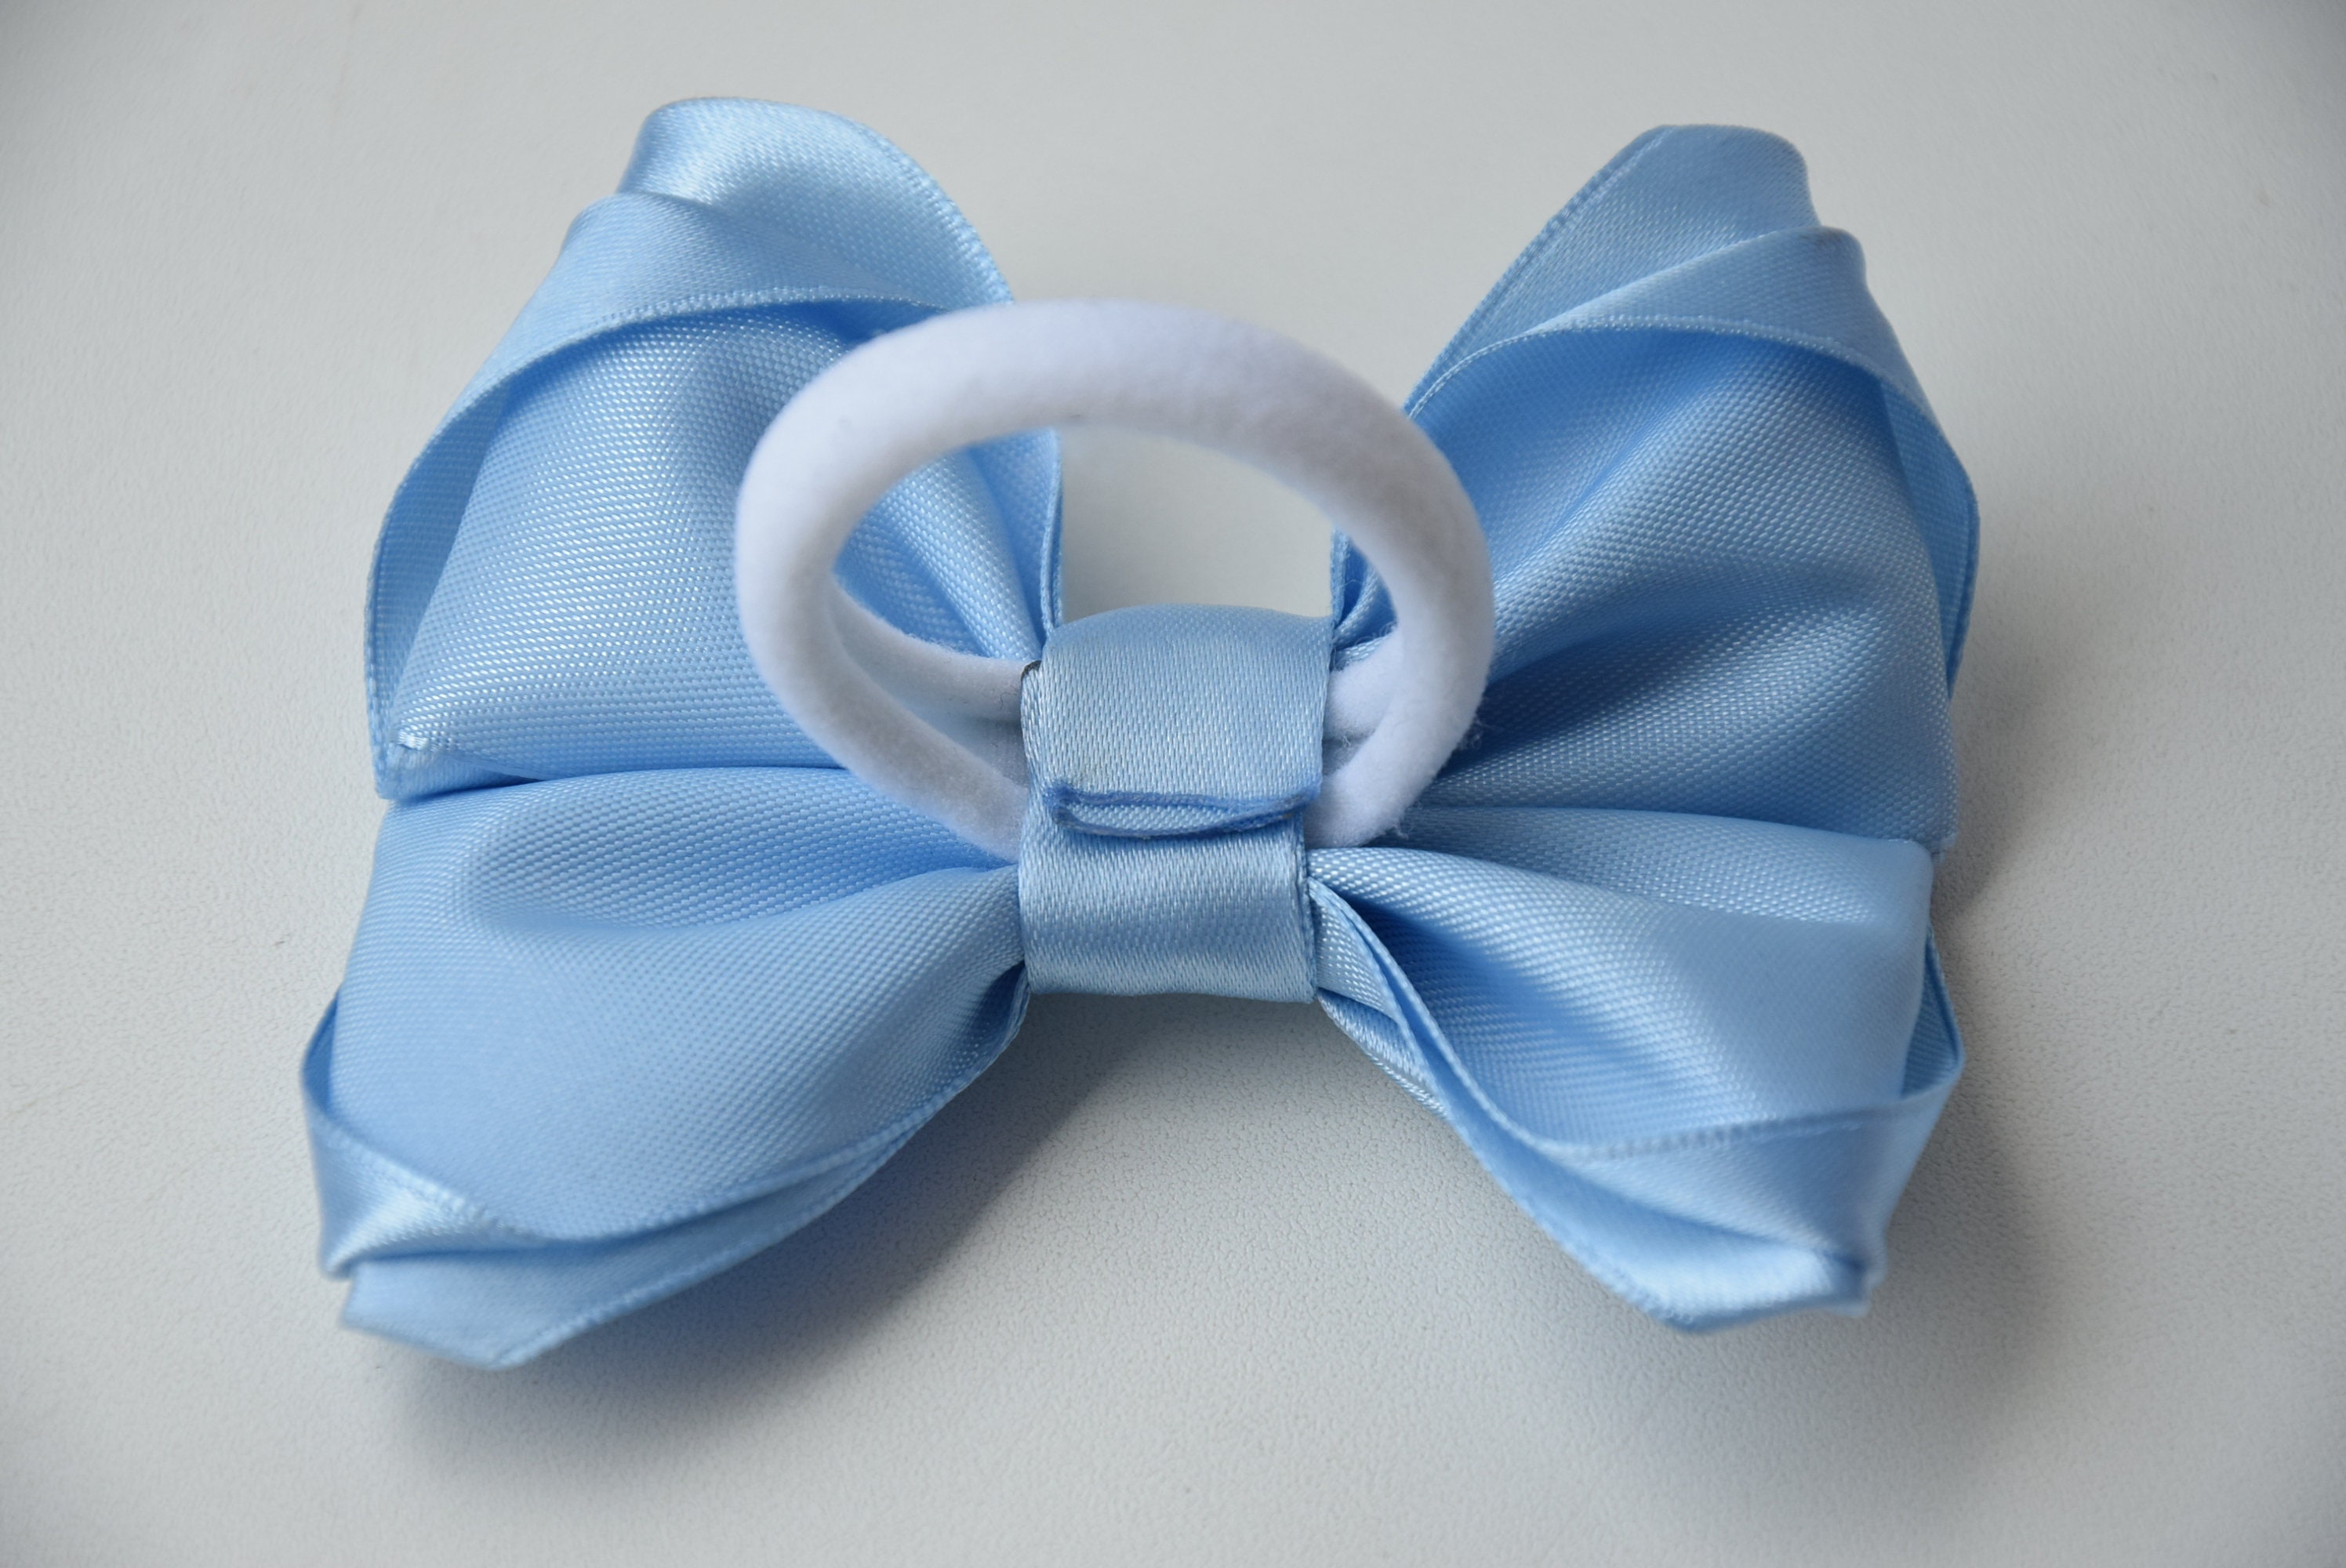 4. Light Blue Satin Hair Bow for Prom - wide 8